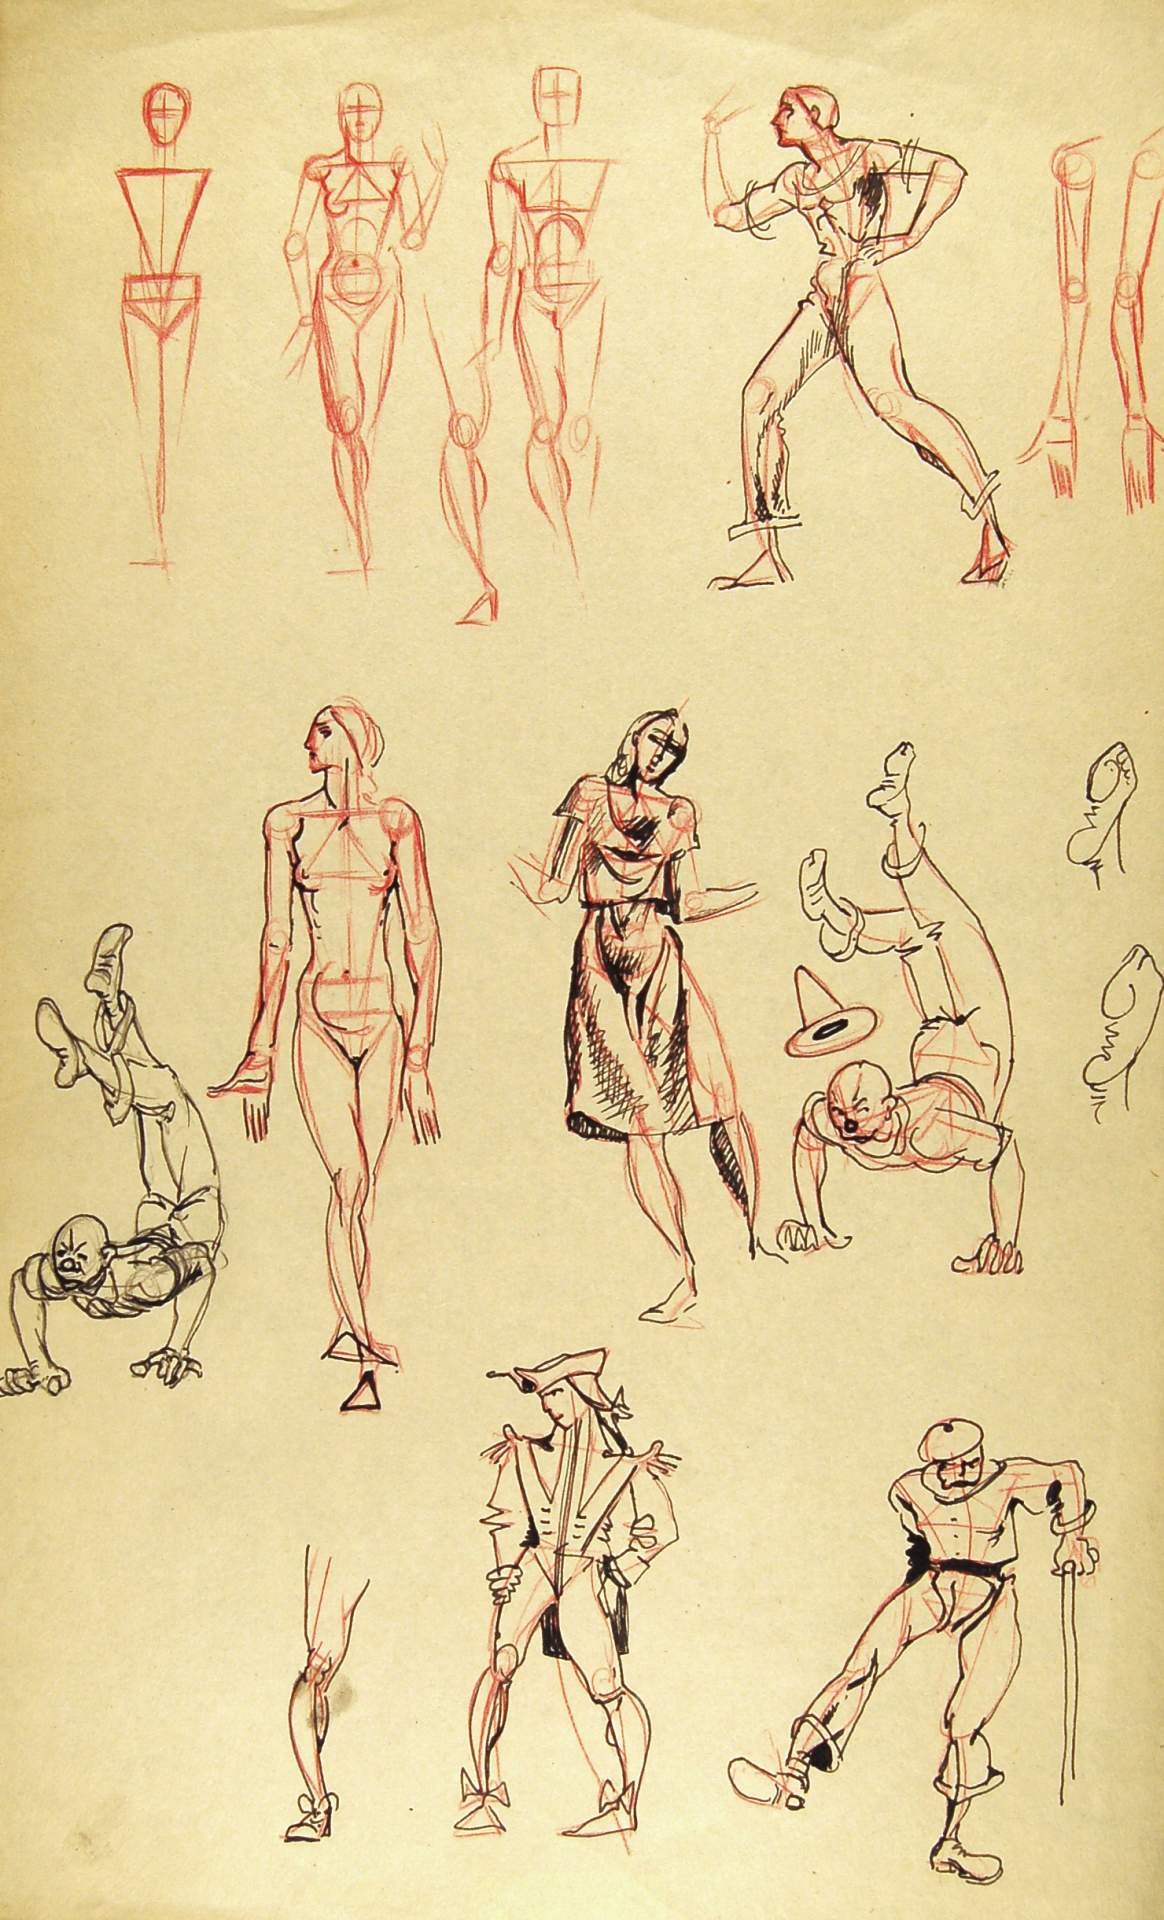 Sketch of Male and Female Figures, Line and Round Forms